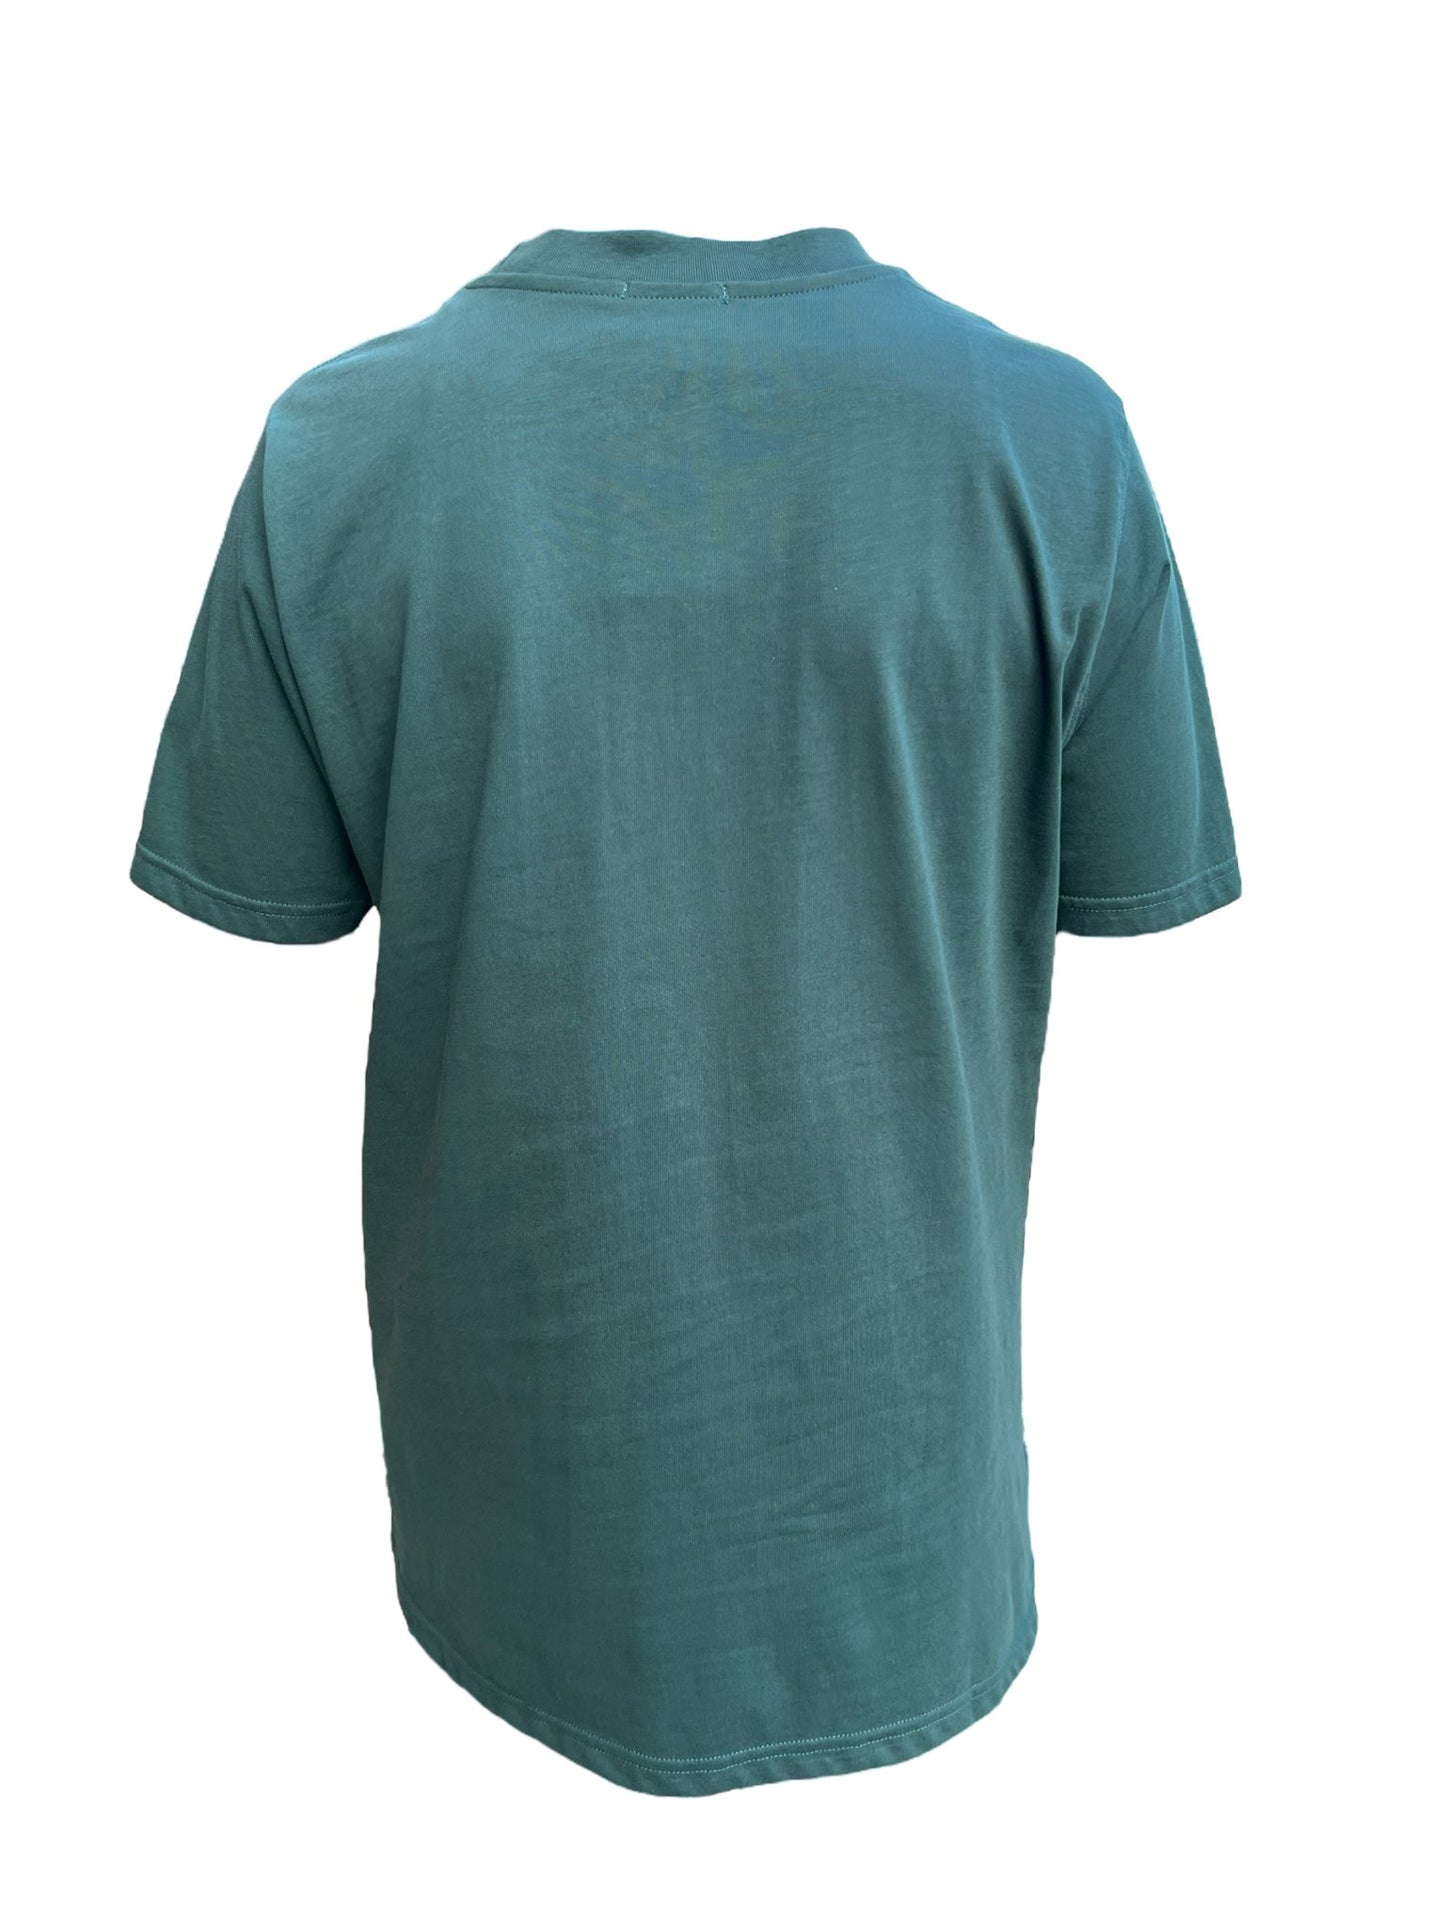 Back view of the FAMILY FIRST TS2407 T-SHIRT SWAN GR in plain green, featuring "FAMILY FIRST" elegantly printed on it, set against a white background.